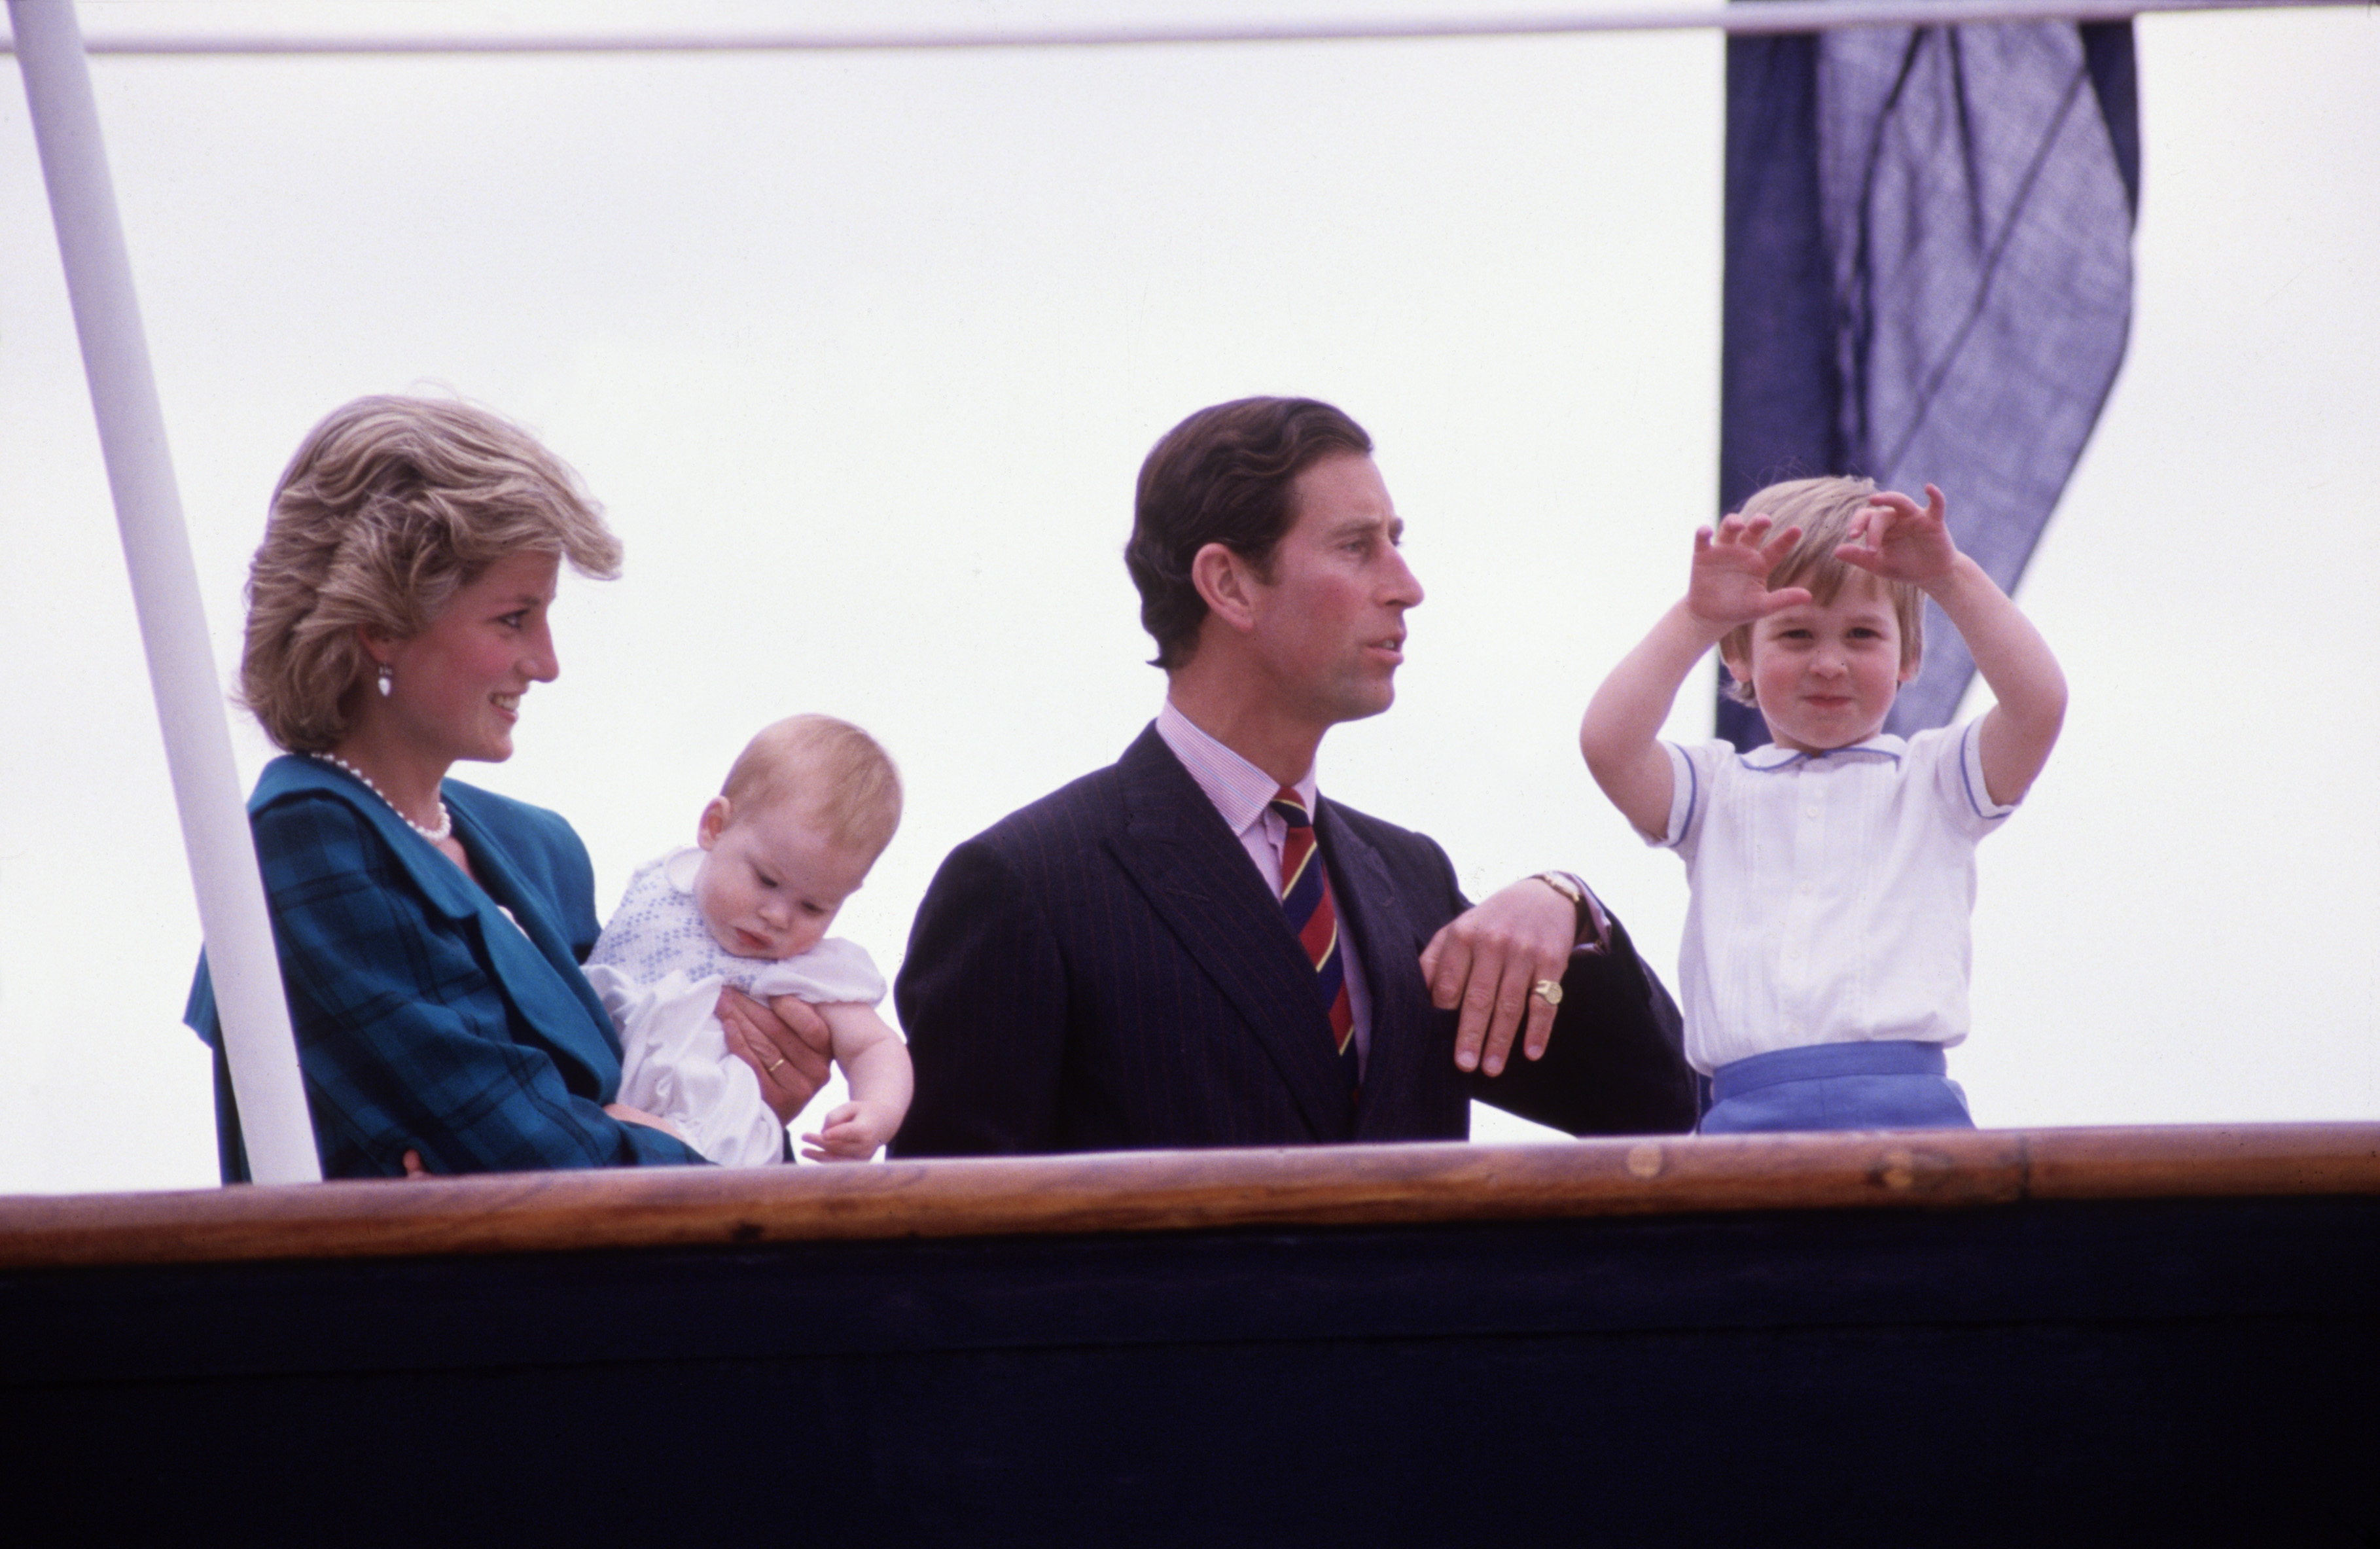 Diana Princess of Wales and Charles Prince of Wales hold Prince Harry and Prince William on the deck of the Royal Yacht Britannia, during the Royal Tour of Italy on May 5, 1985 in Venice Italy. (David Levenson—Getty Images)